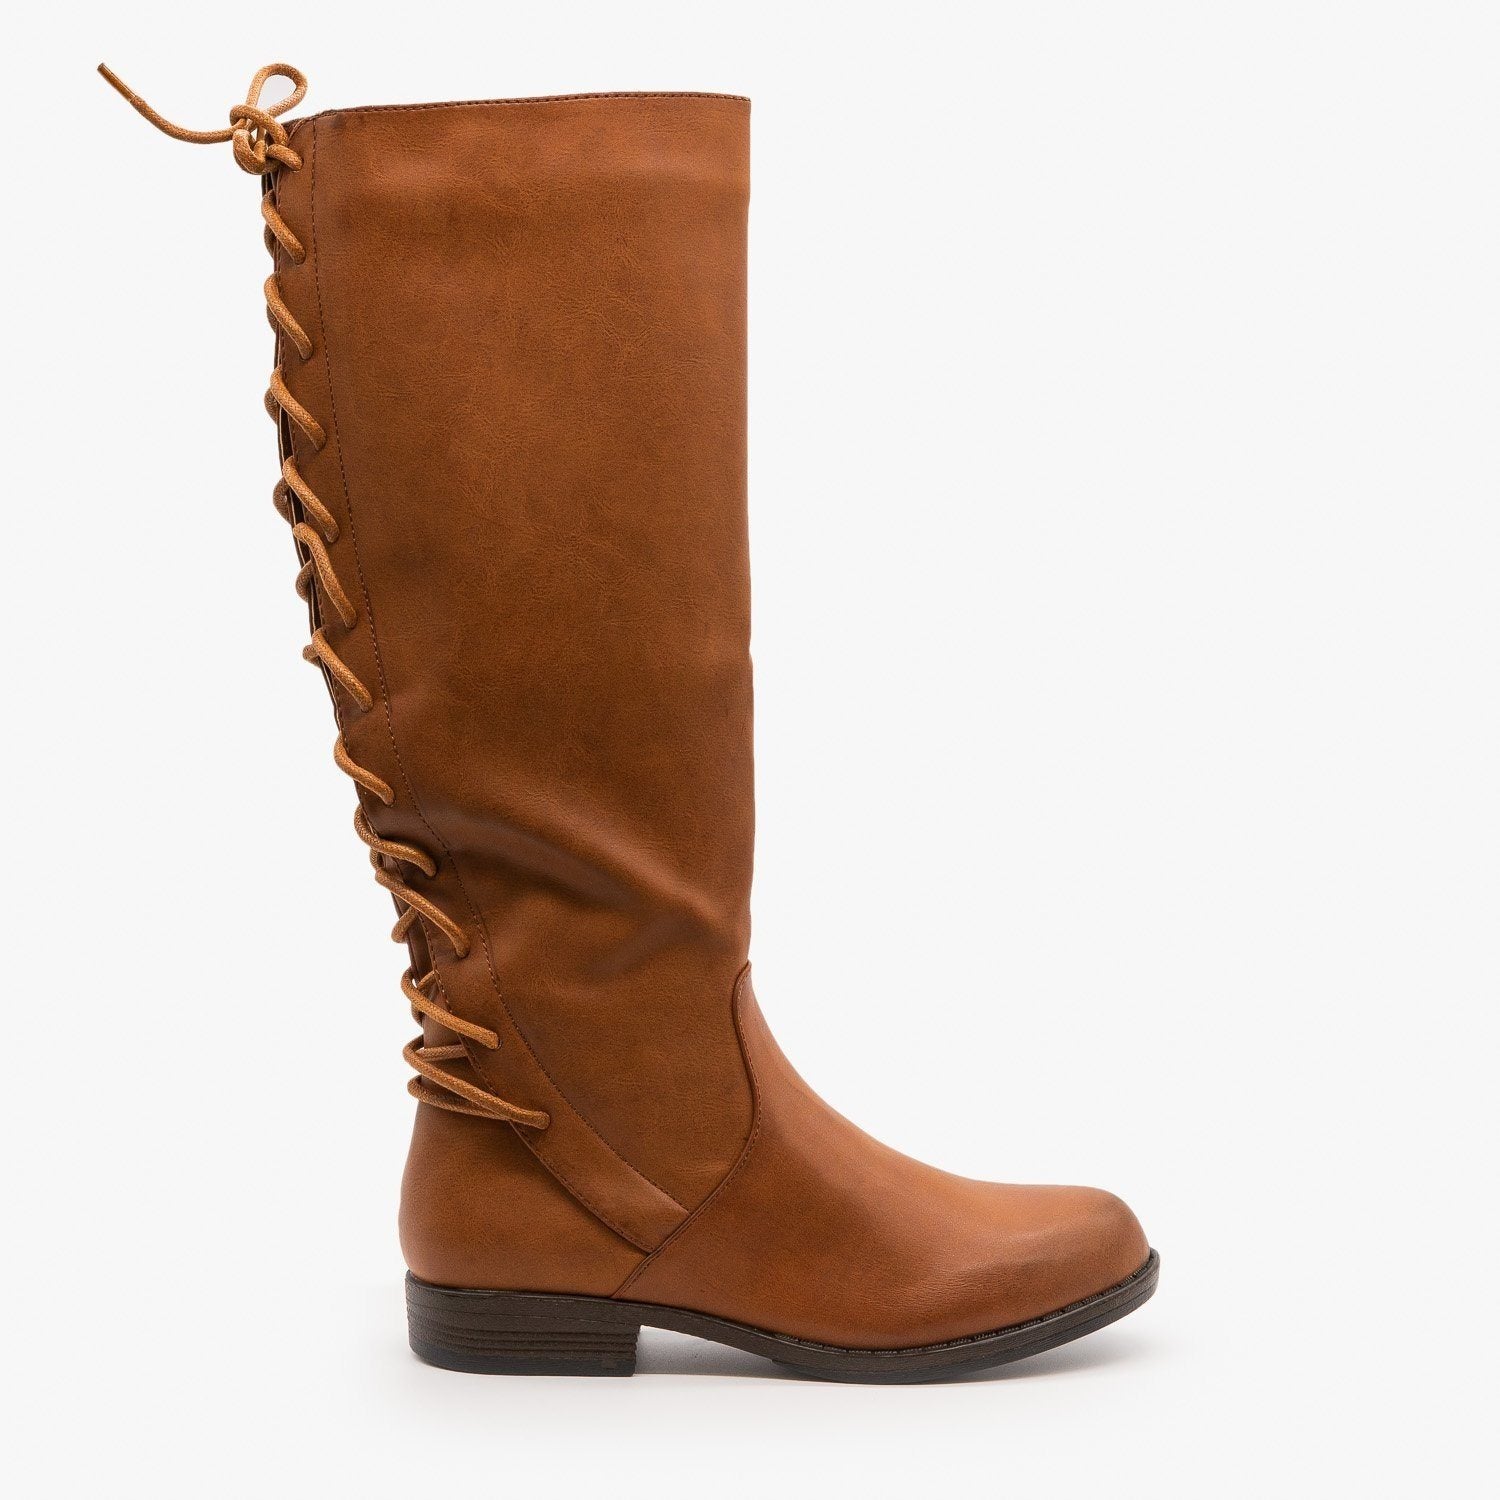 Lace-Up Back Riding Boots - Bamboo 